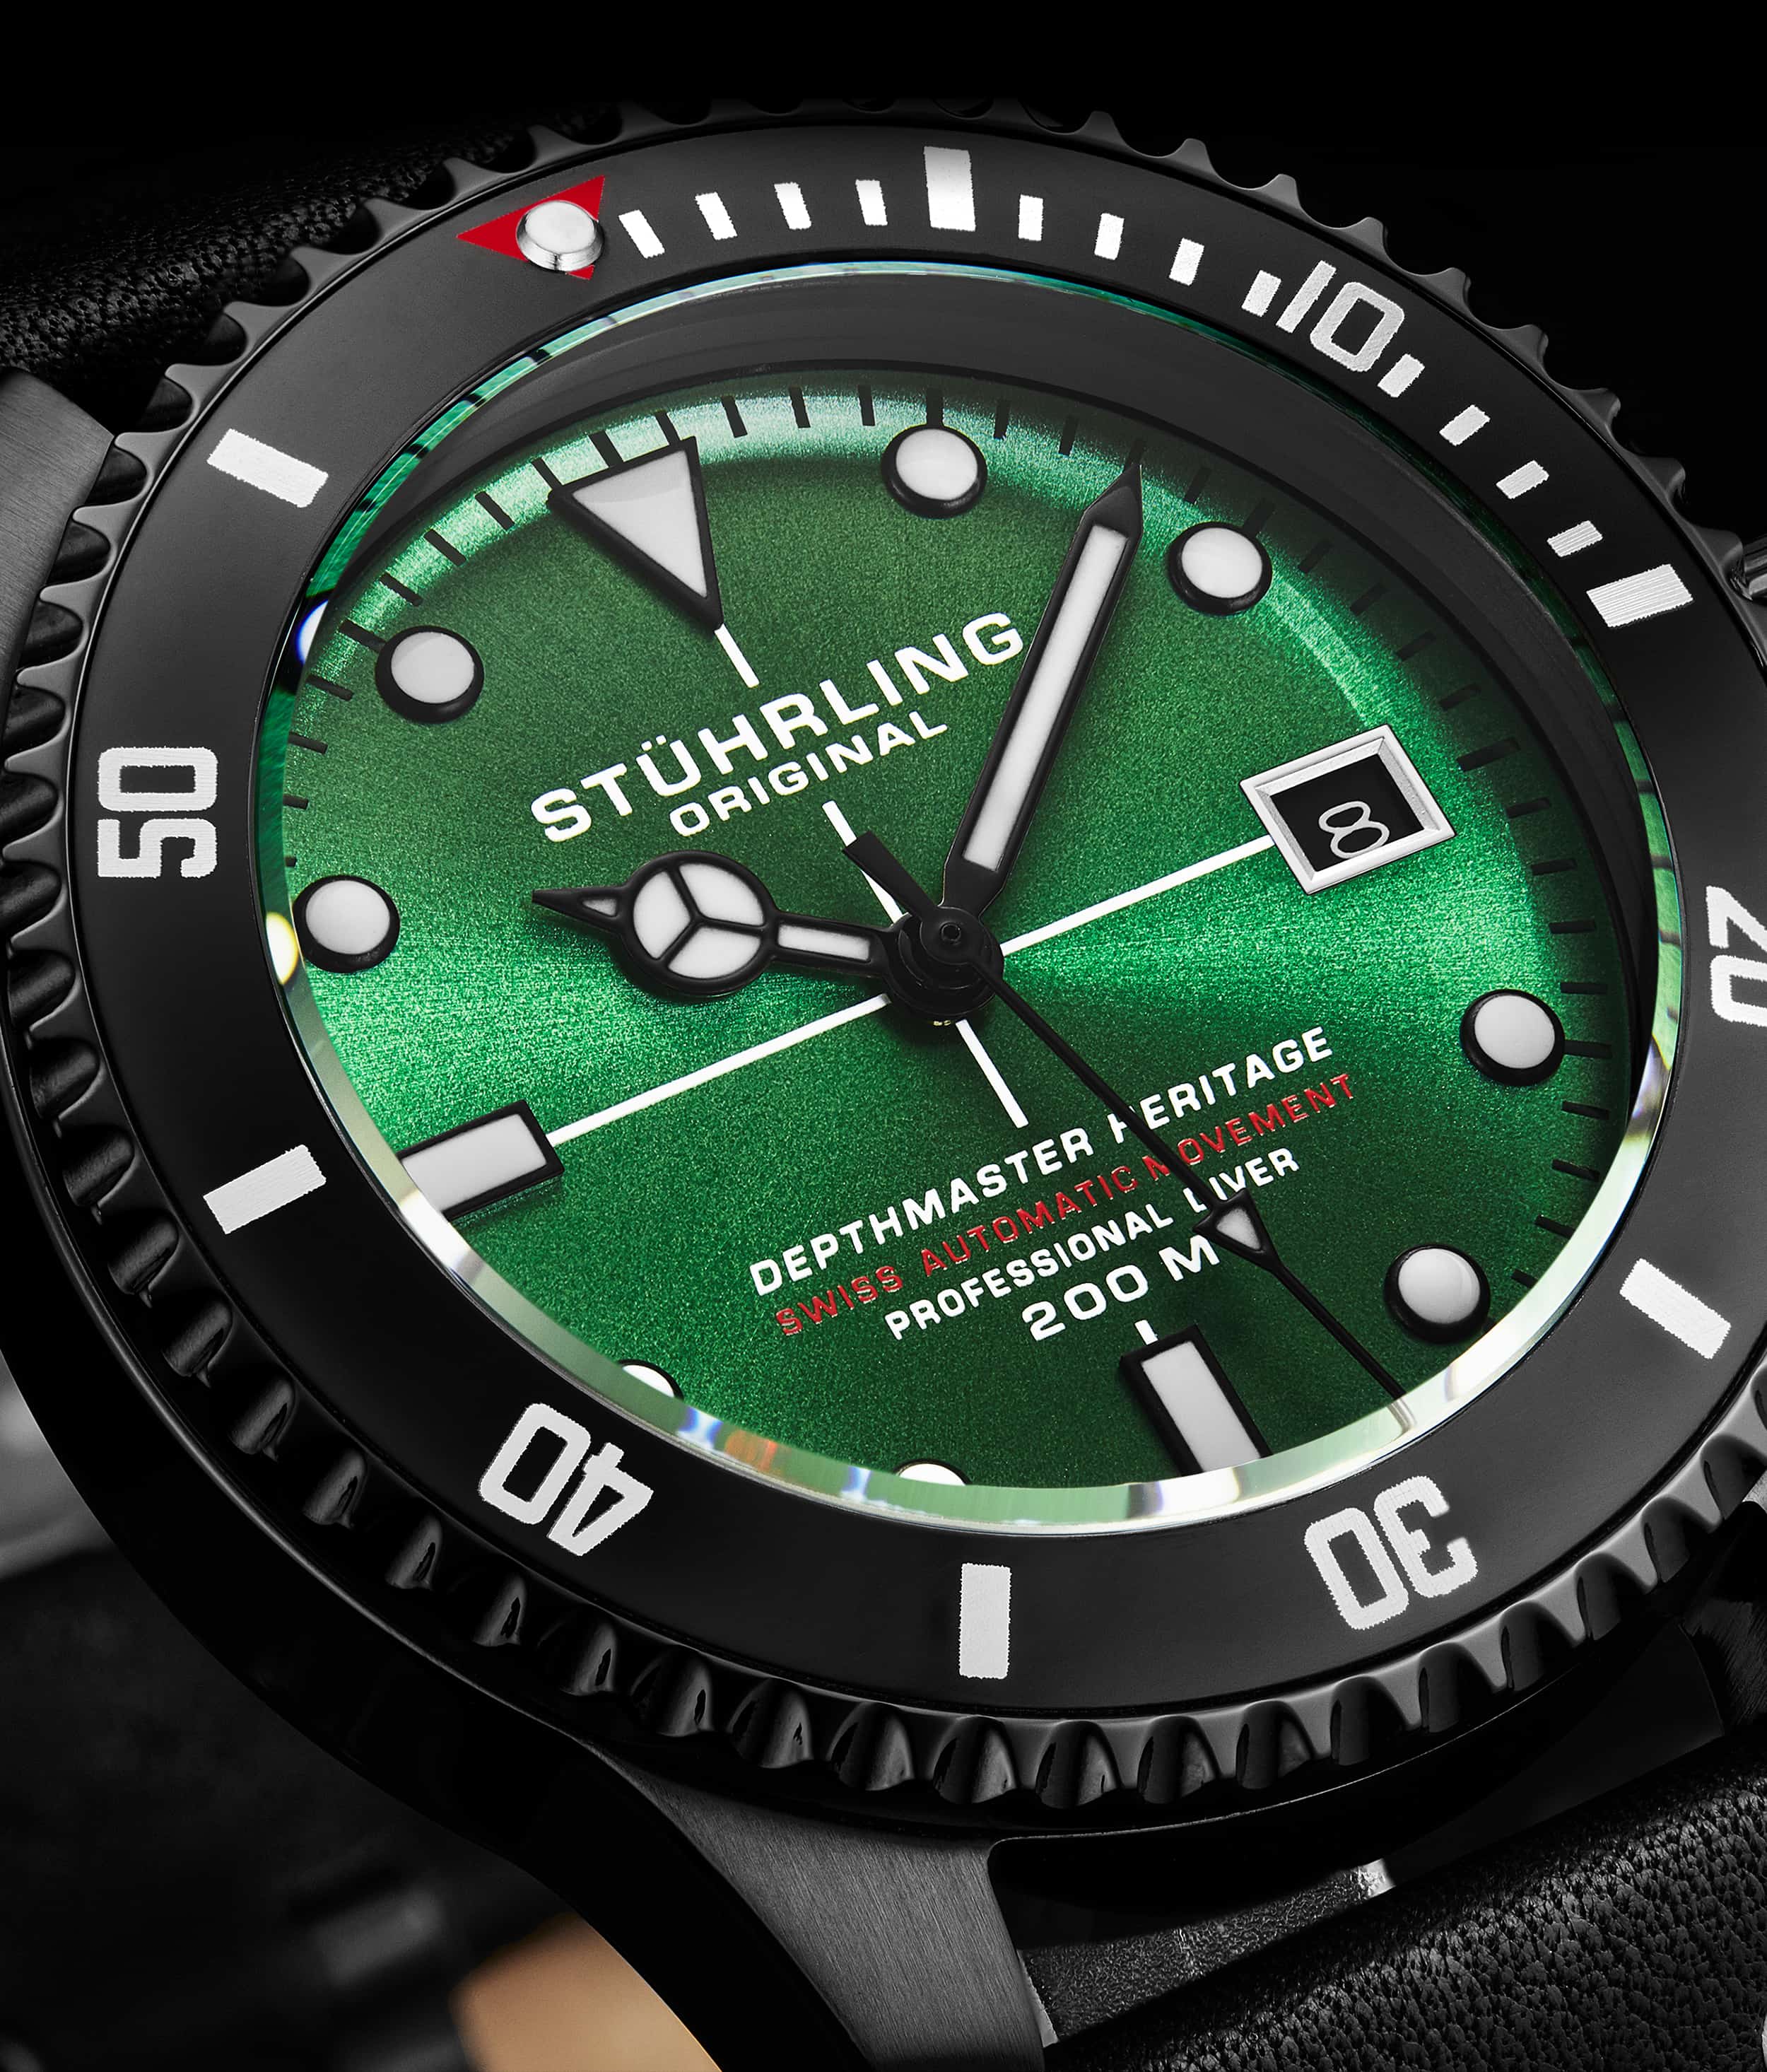 Swiss Automatic Depthmaster Heritage 883HB 42mm Diver